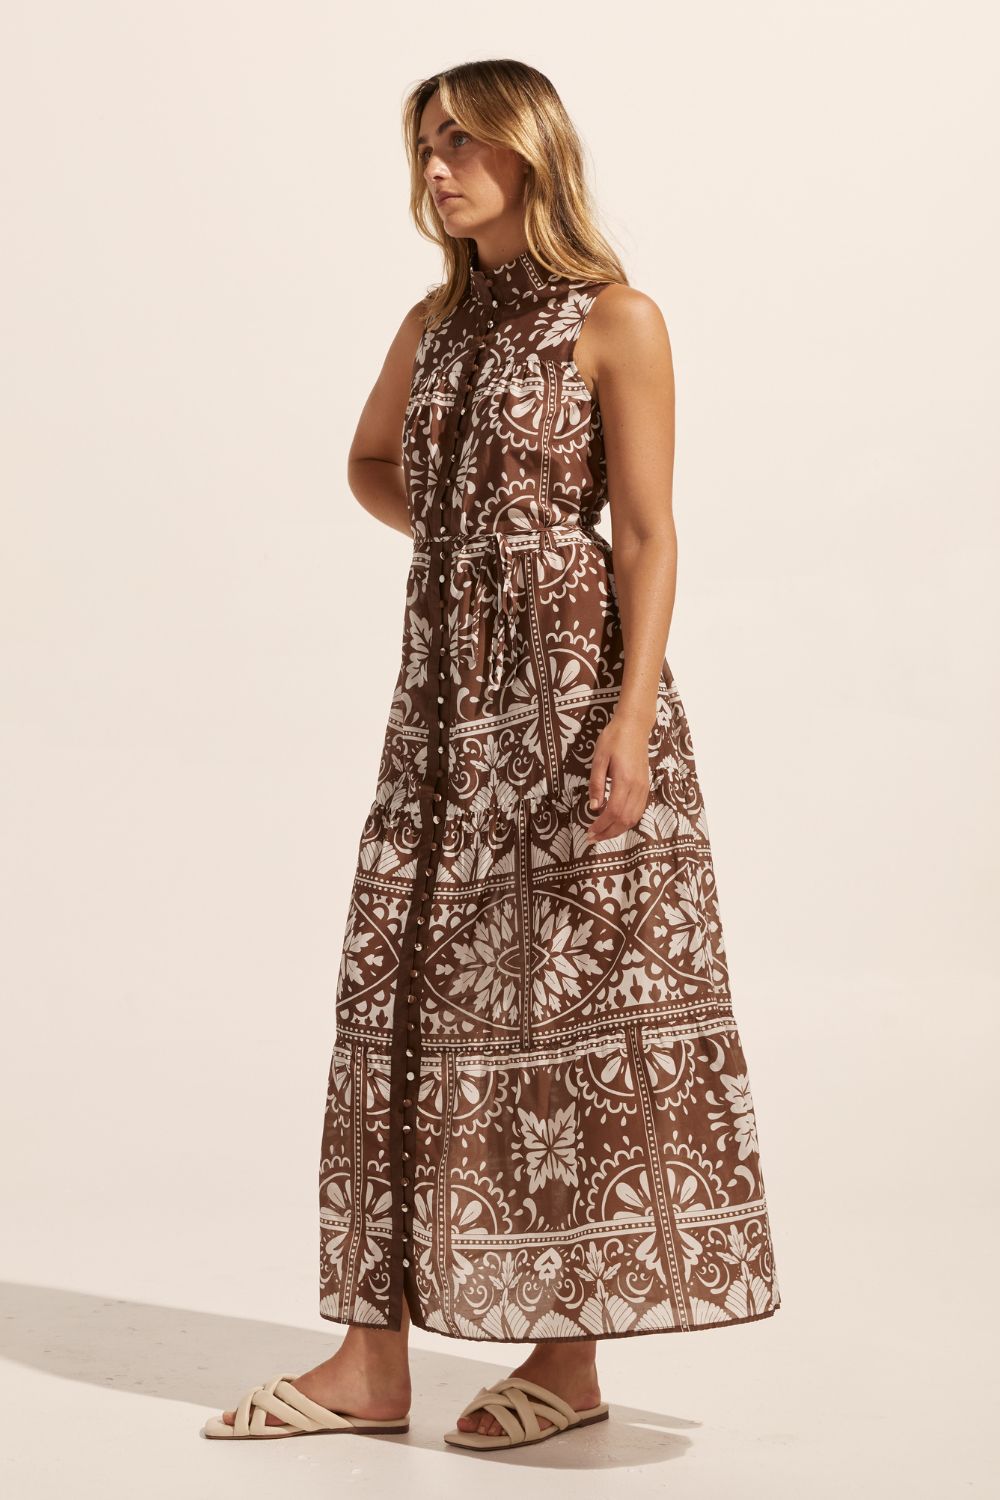 brown and white print, high neck, buttons down centre, thin fabric belt, sleeveless, dress, side view